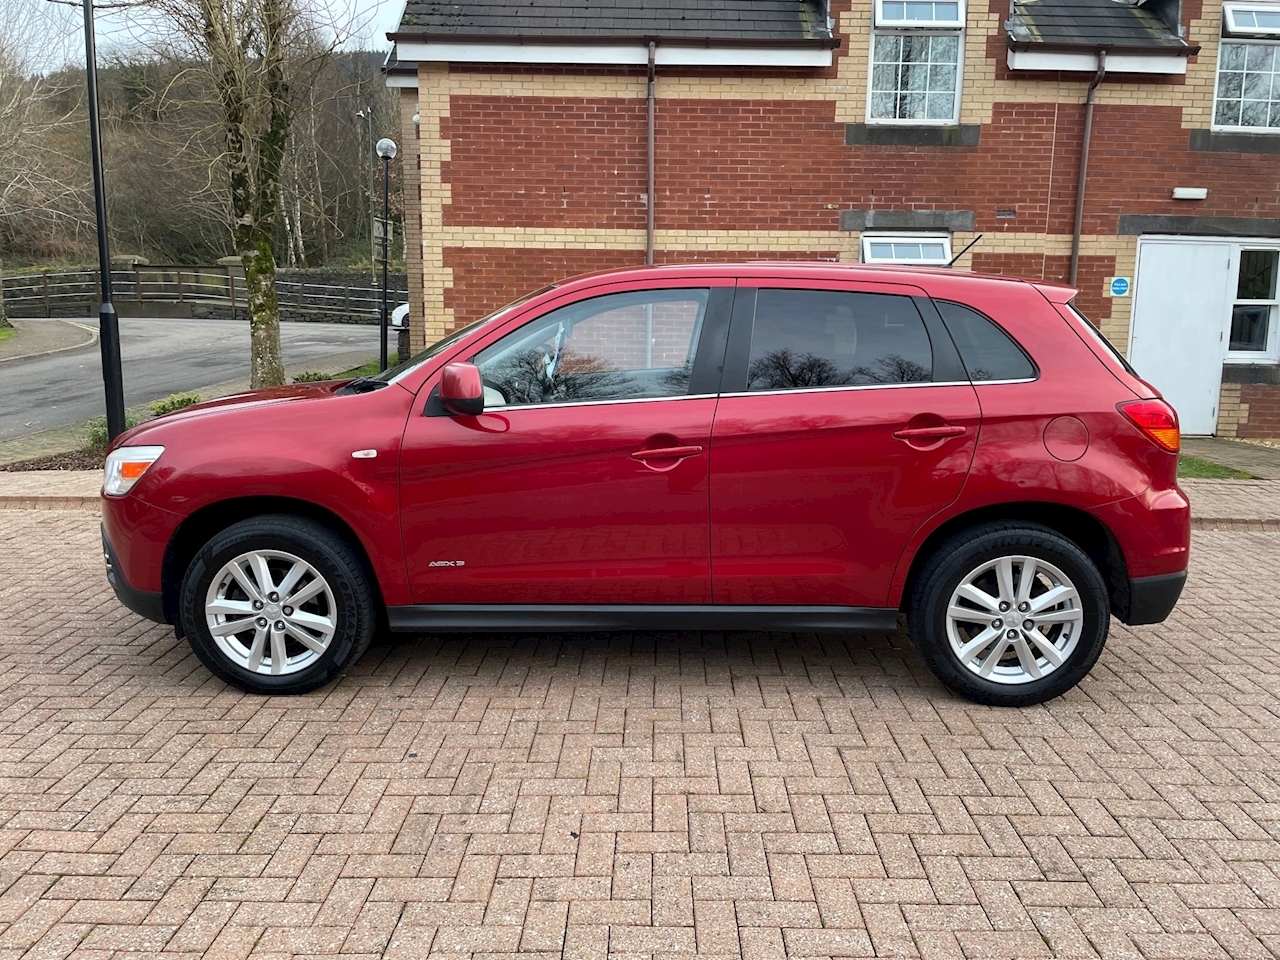 1.8D ClearTec 3 SUV 5dr Diesel Manual (145 g/km, 147 bhp)